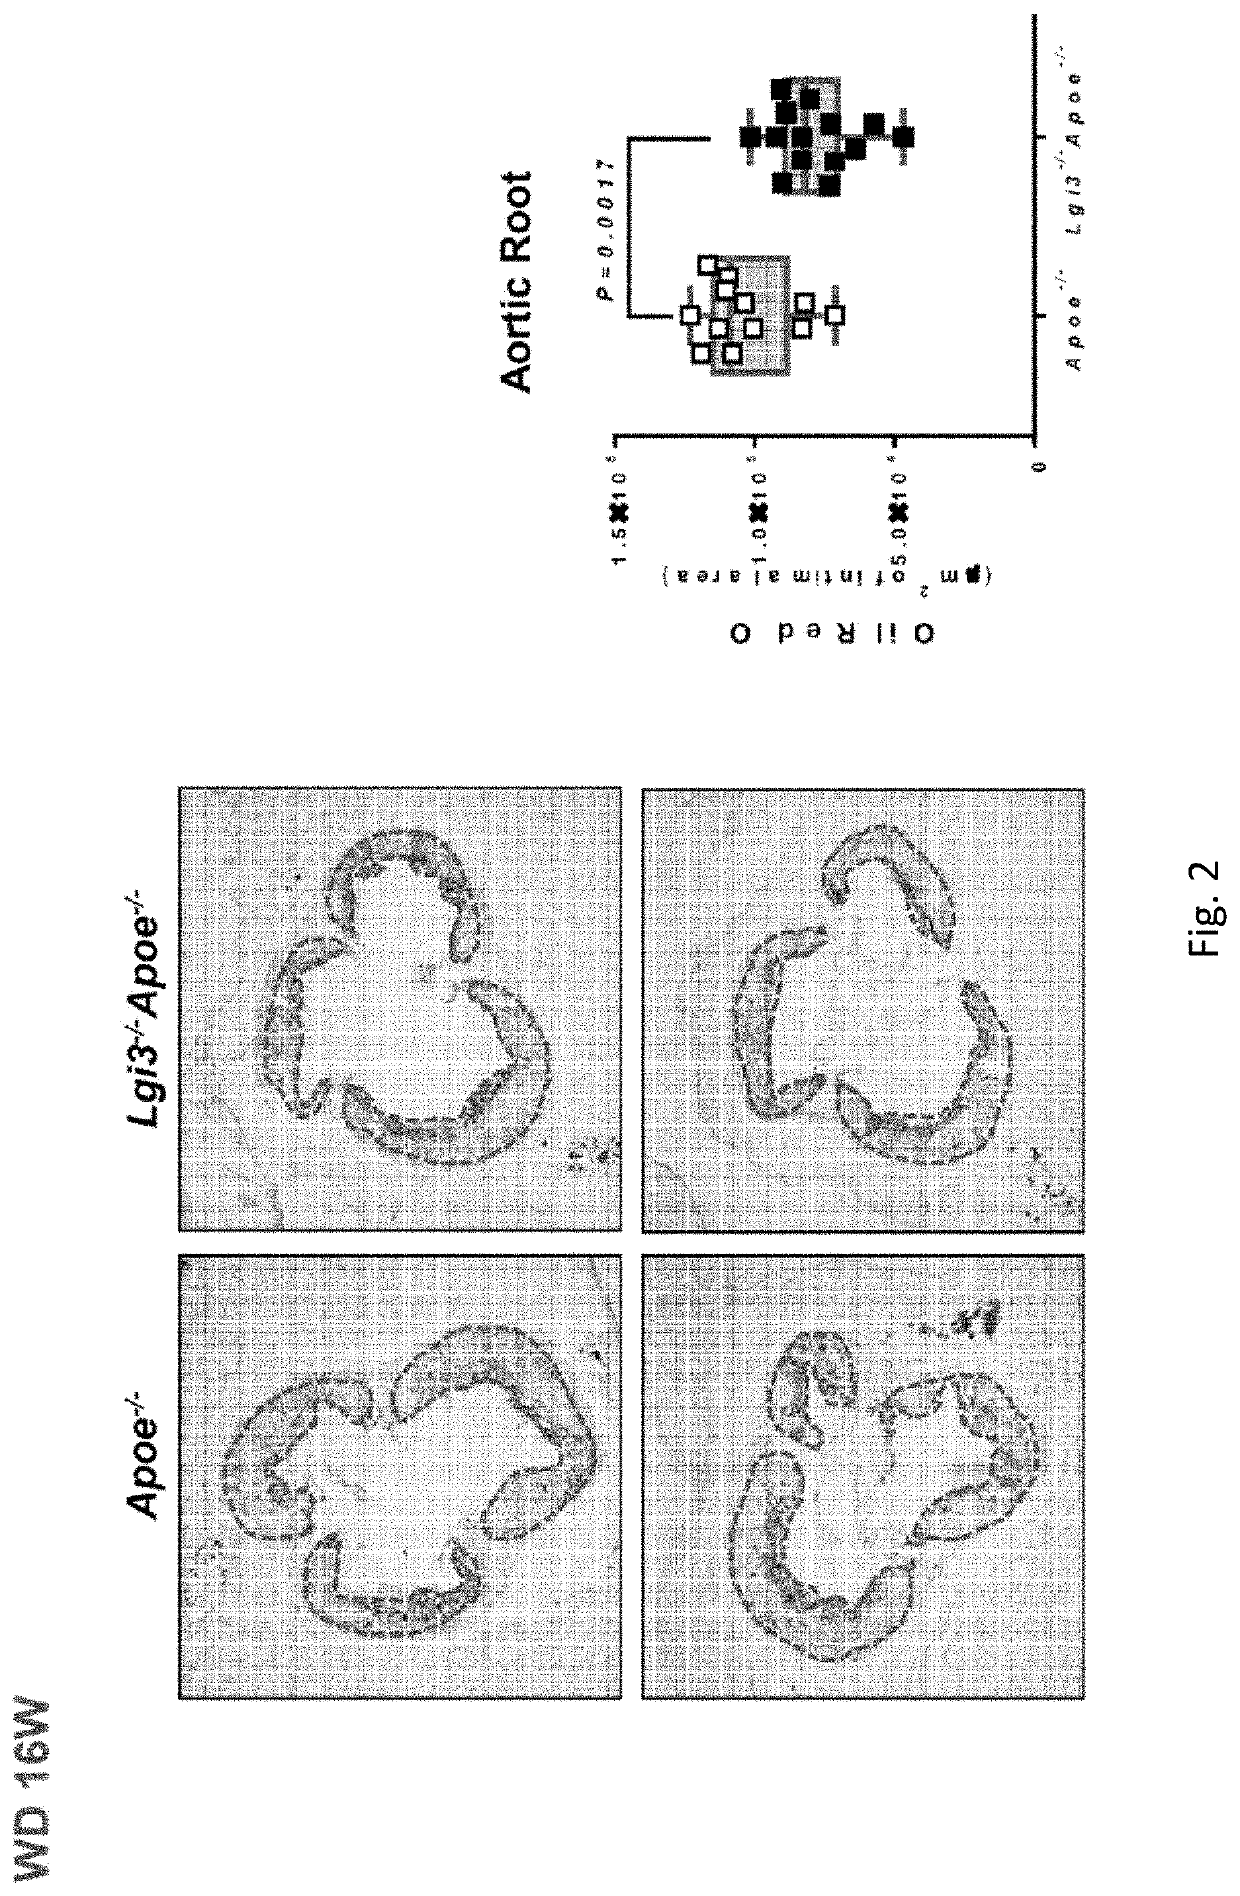 Marker for diagnosing atherosclerosis severity, and diagnostic method using same